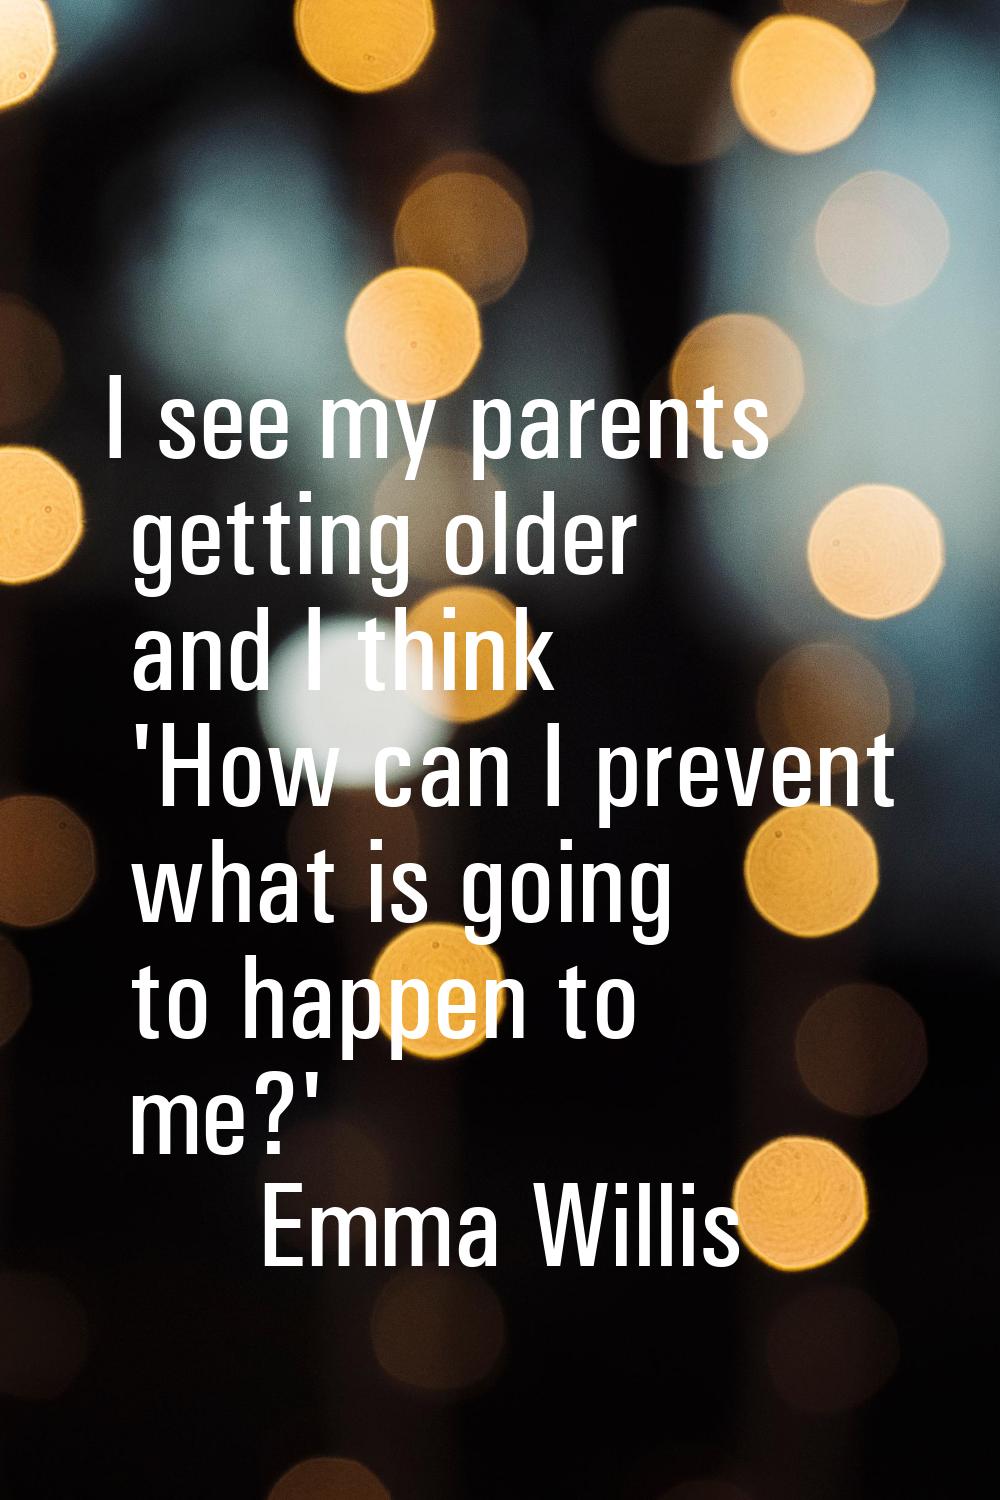 I see my parents getting older and I think 'How can I prevent what is going to happen to me?'